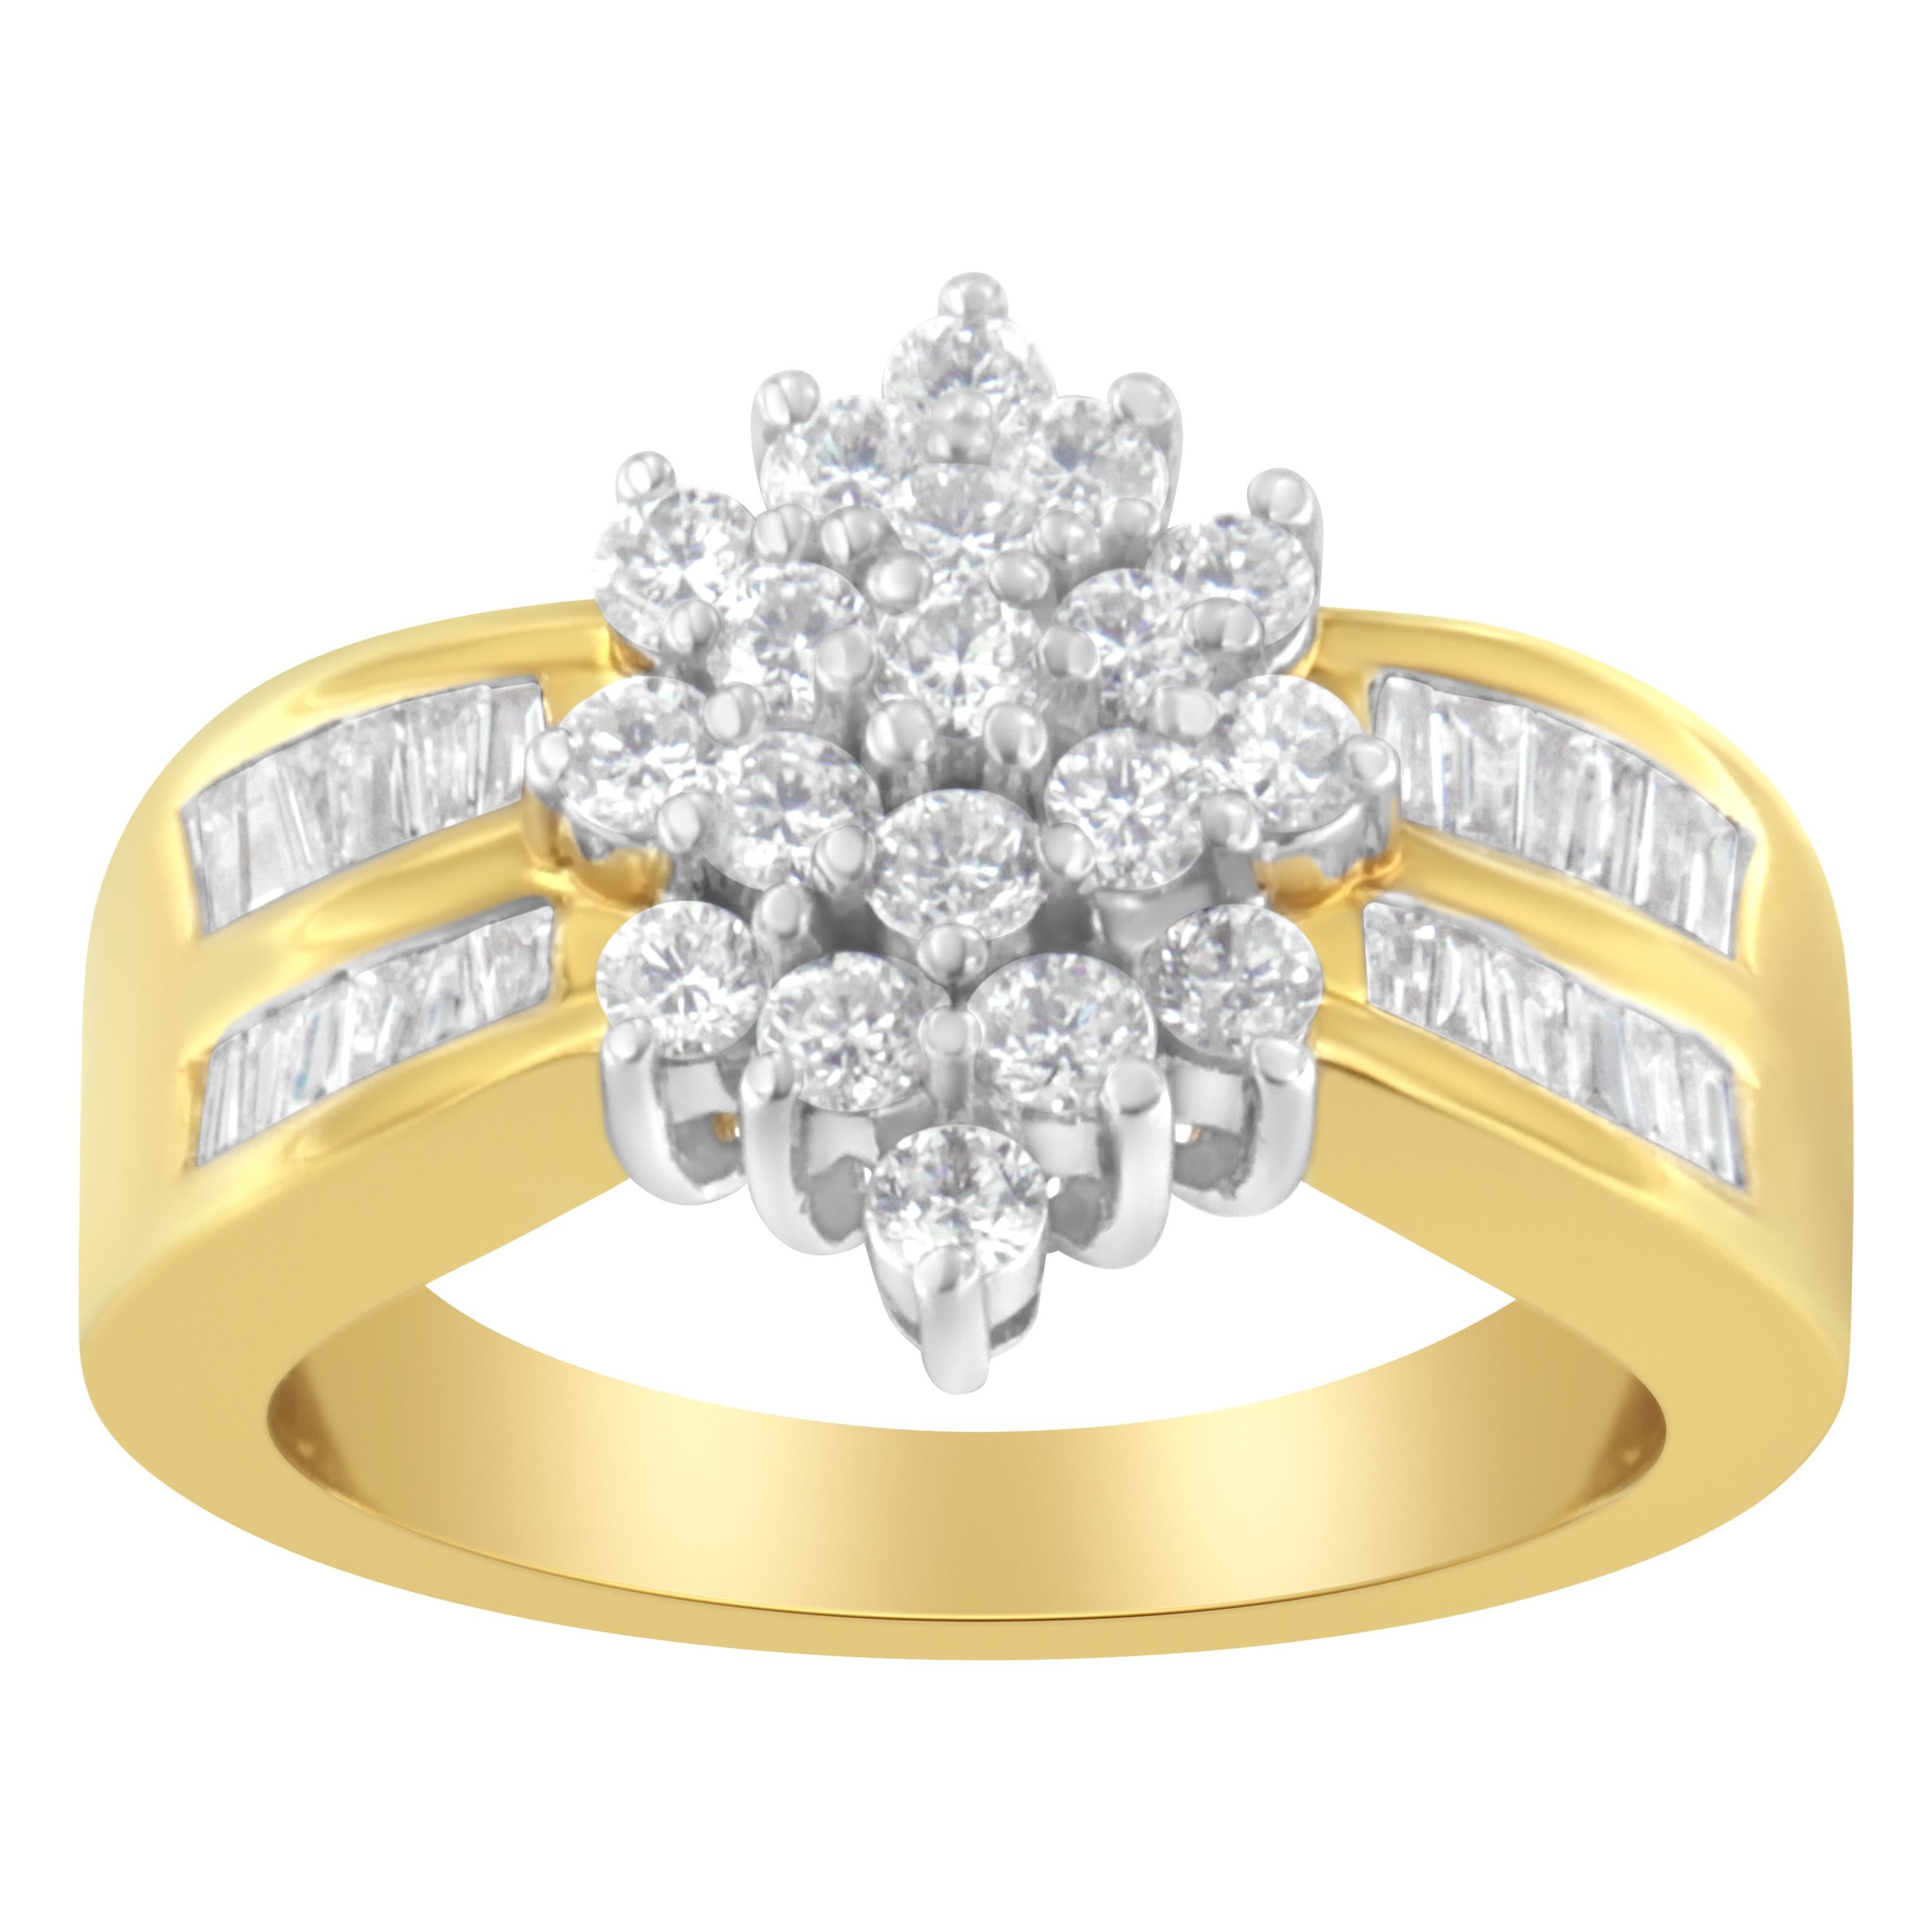 For Sale:  10K Yellow Gold 1.00 Carat Round and Baguette-Cut Diamond Floral Cluster Ring 2